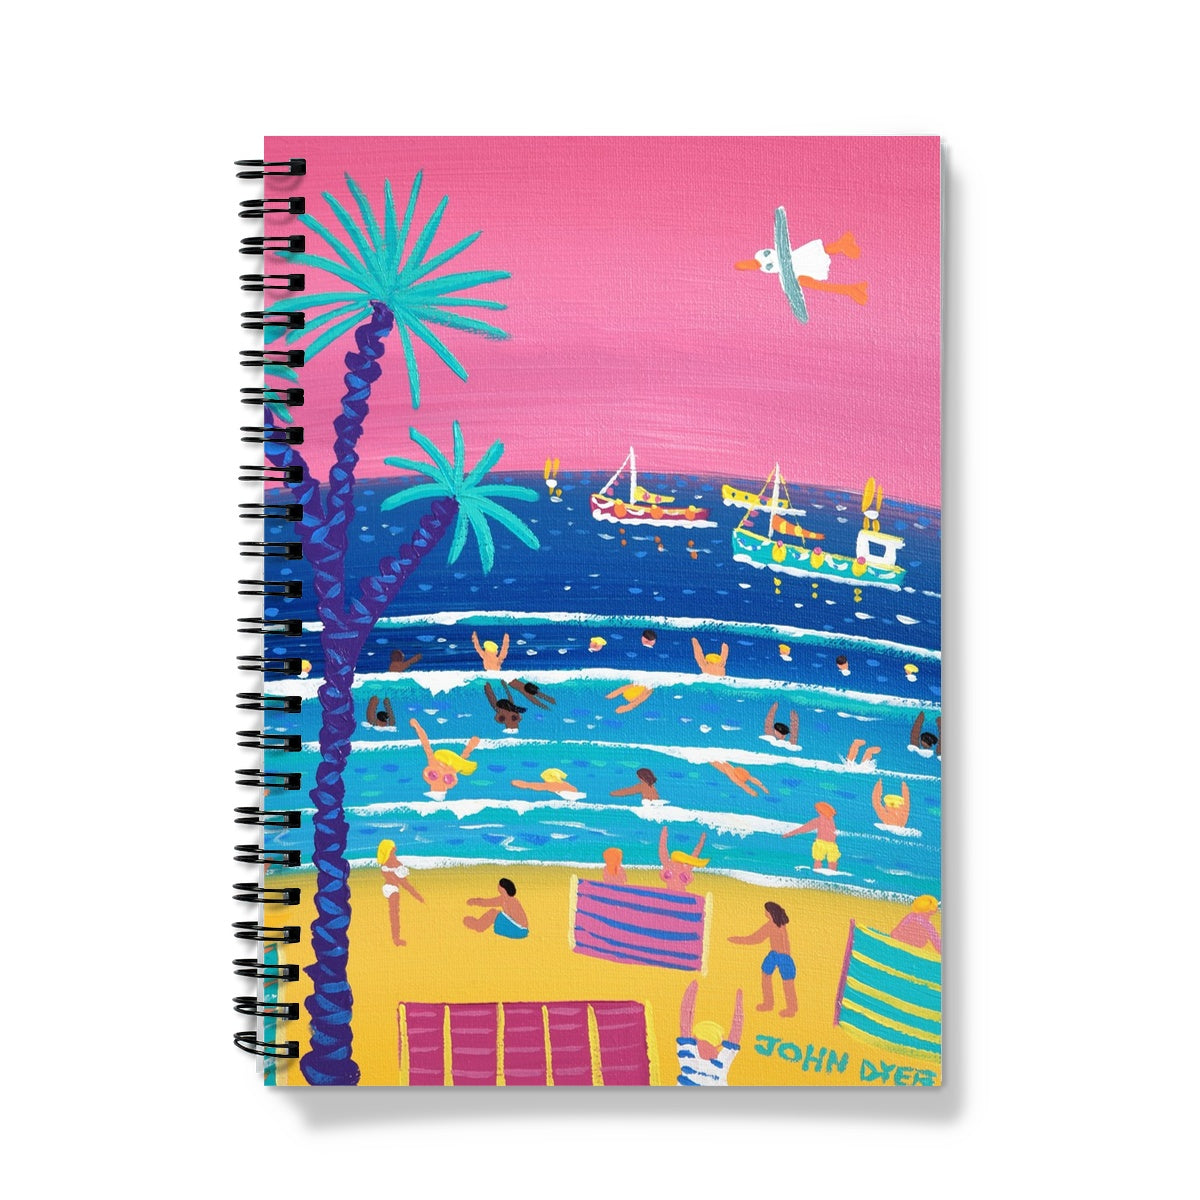 'Evening Skies on a Hot Summer Day' Cornish Contemporary Art Notebook by John Dyer